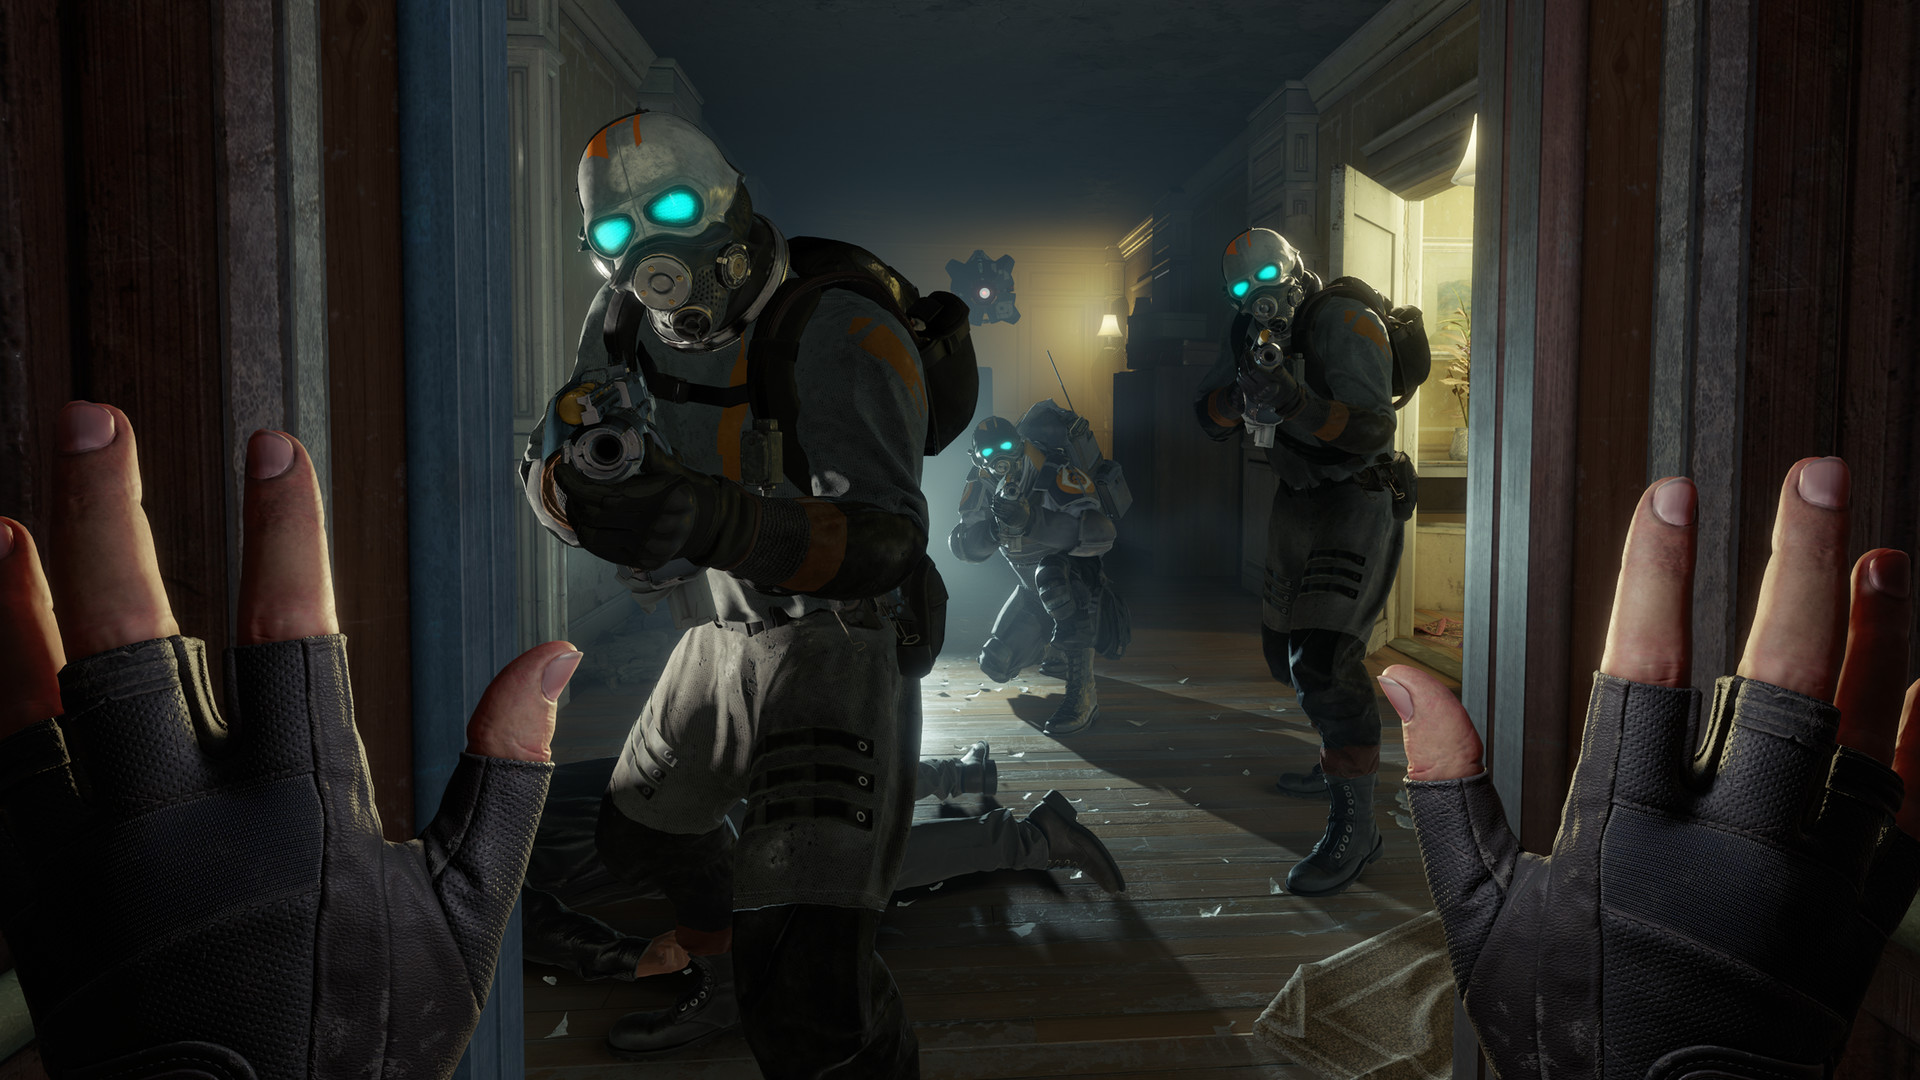 Evil looking figures are turned to attack you in Half-Life: Alyx